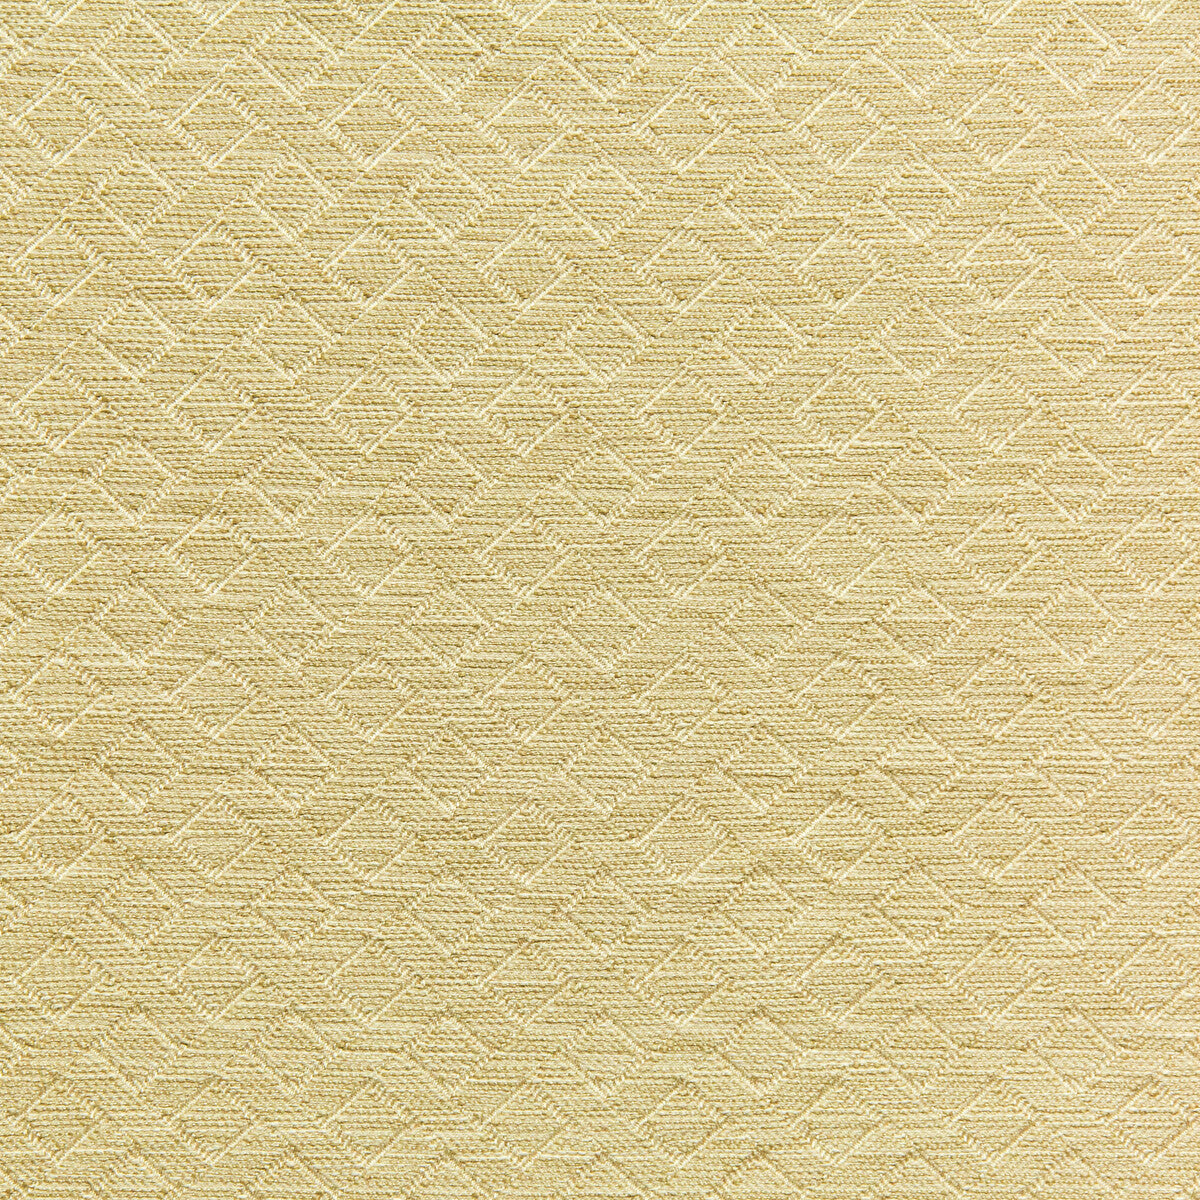 Maldon Weave fabric in sand color - pattern 2020102.16.0 - by Lee Jofa in the Linford Weaves collection